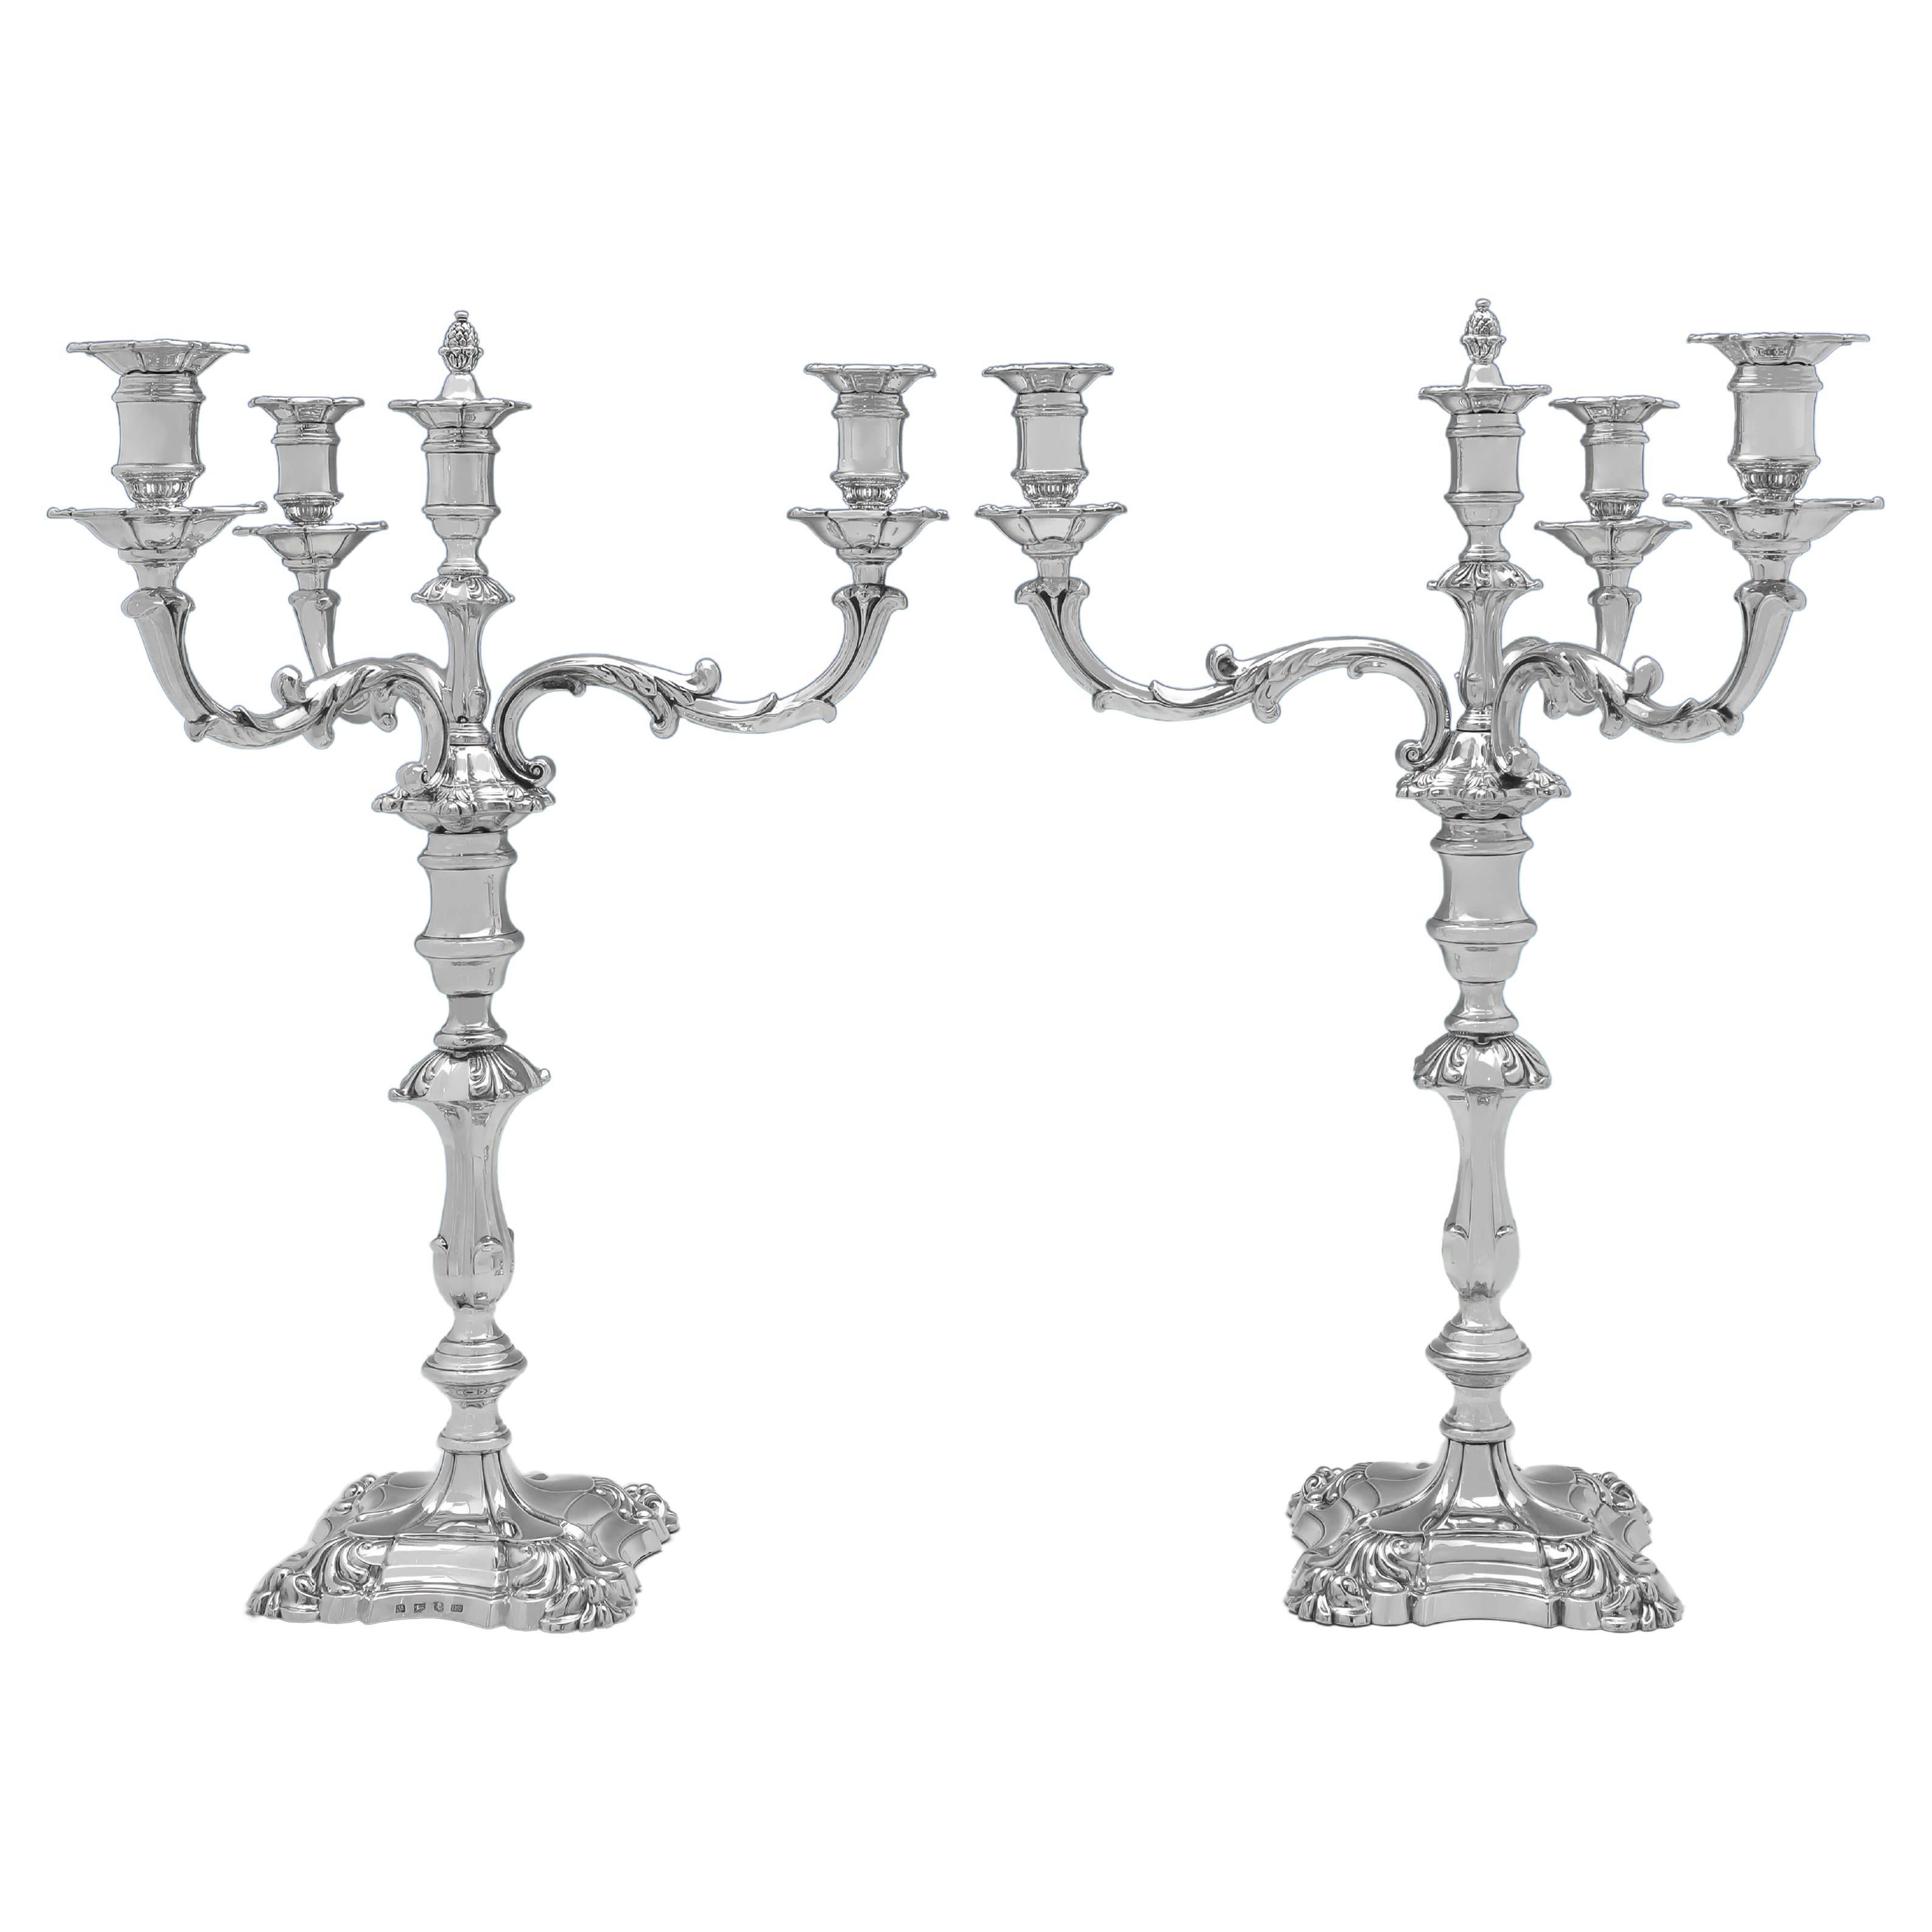 Large Pair of  Victorian 4 Shell Candelabra - 22" tall - Hallmarked in 1844/45